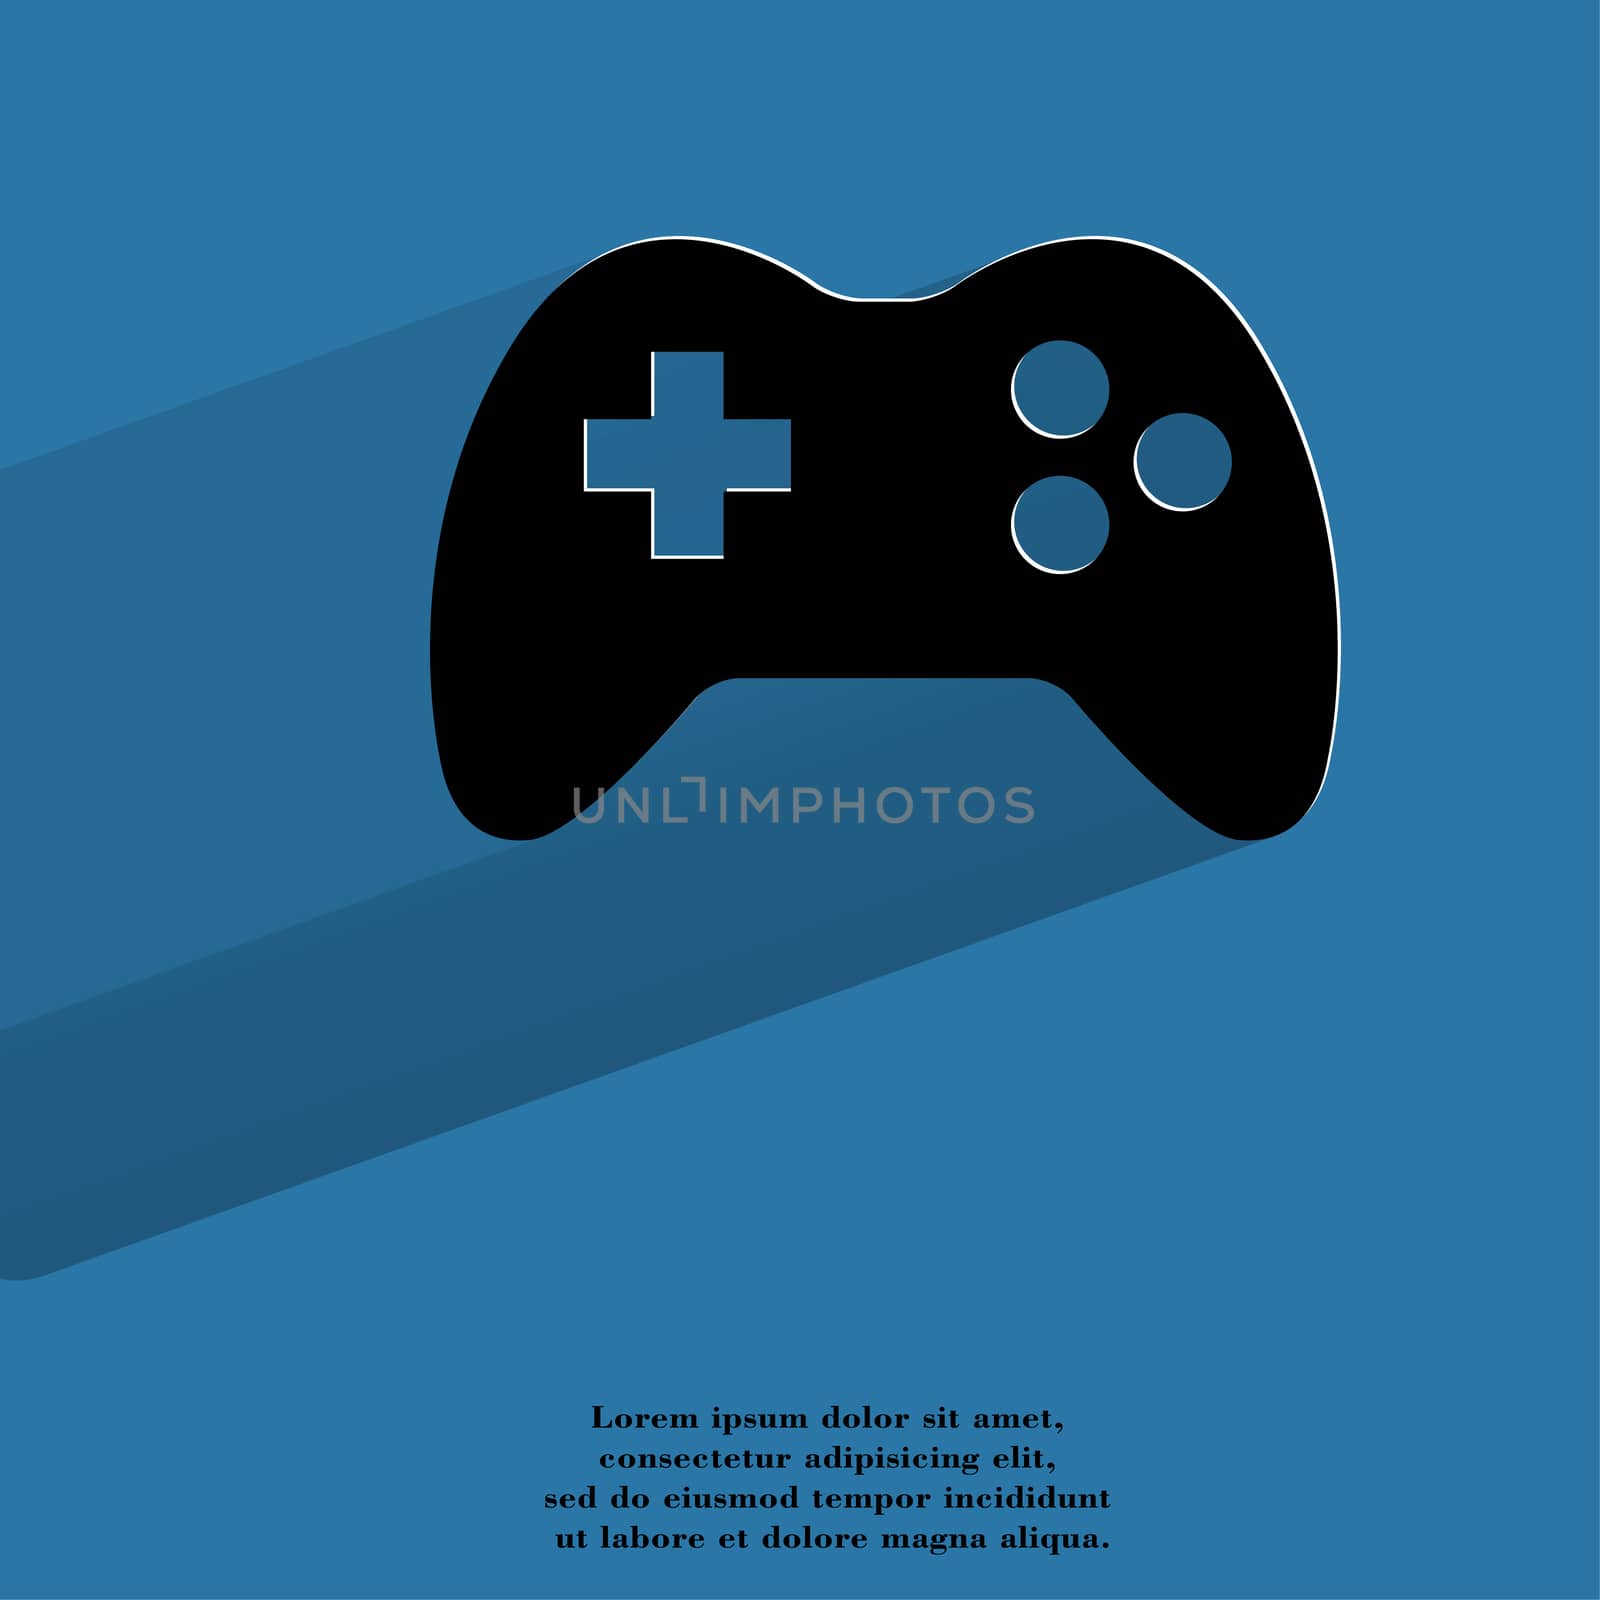 Gaming Joystick. Flat modern web button with long shadow and space for your text. . 